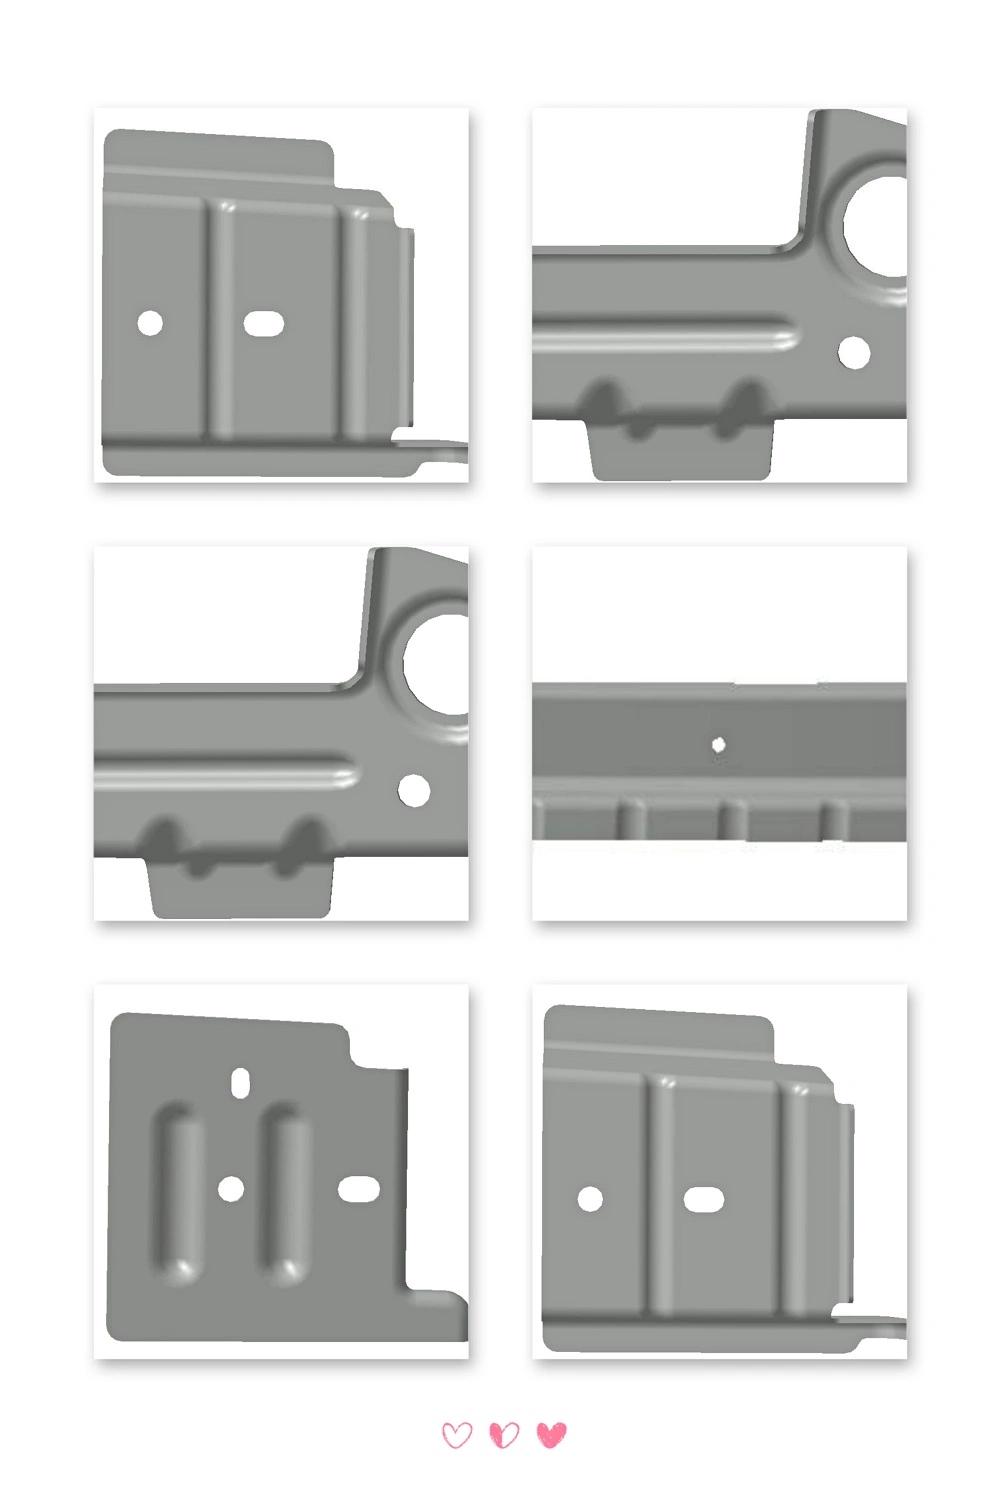 Farming Parts, Auto Parts, Welded, Machining Metal Bracket, Architectural Parts, Sheet Metal Fabrication, Stamping Parts